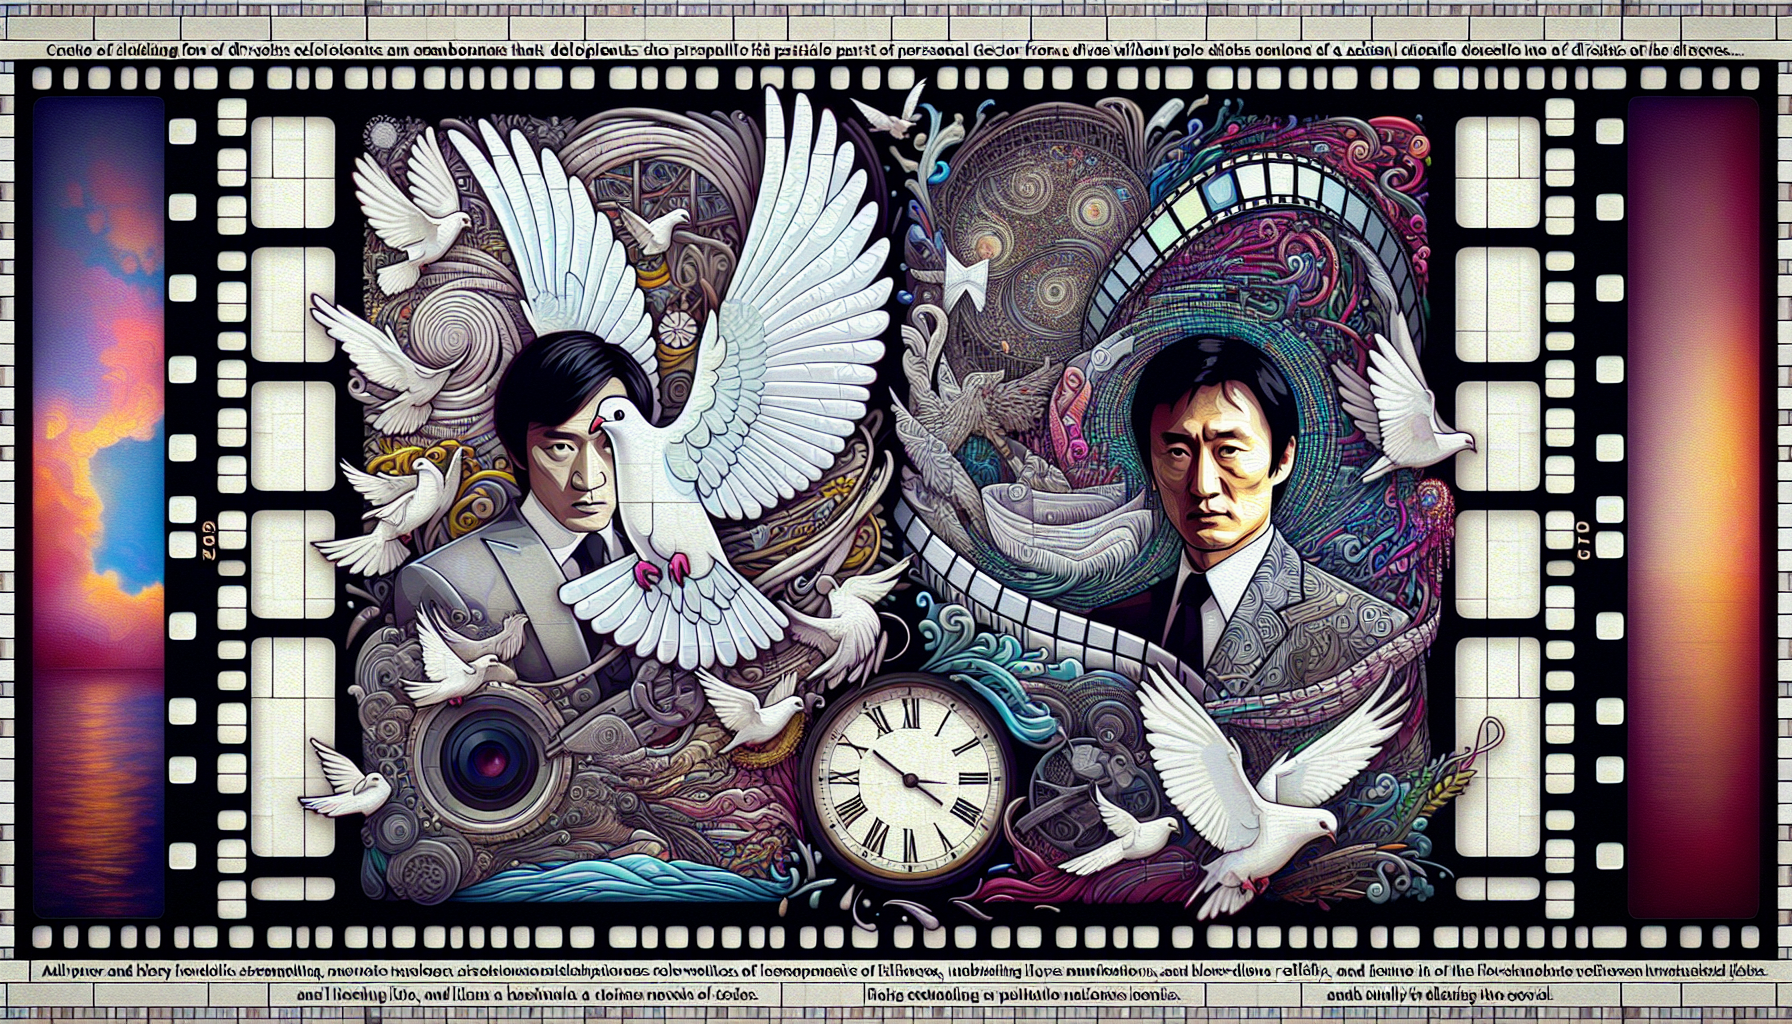 An artistic mosaic featuring portraits of directors John Woo and Christopher Nolan, surrounded by iconic elements from their films, such as doves and slow-motion action sequences for Woo, and intricat